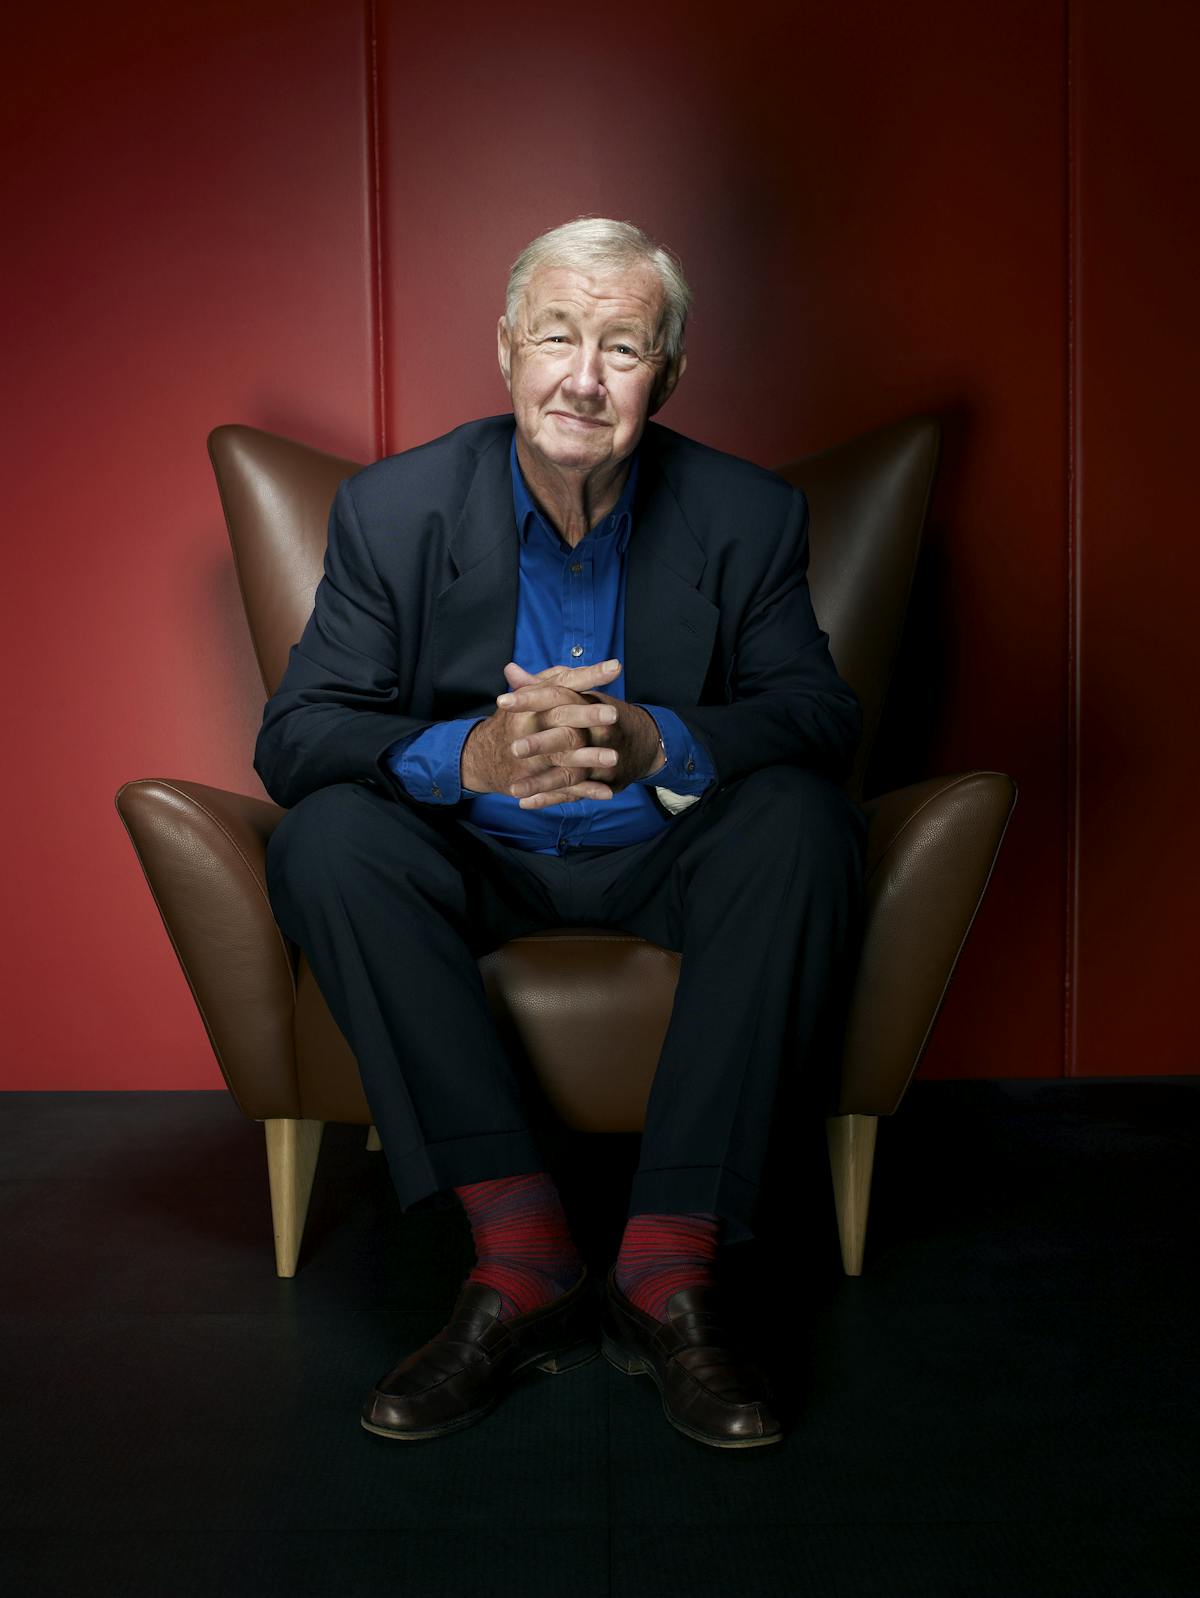 Sir Terence Conran, visionary founder of the Design Museum, has passed away